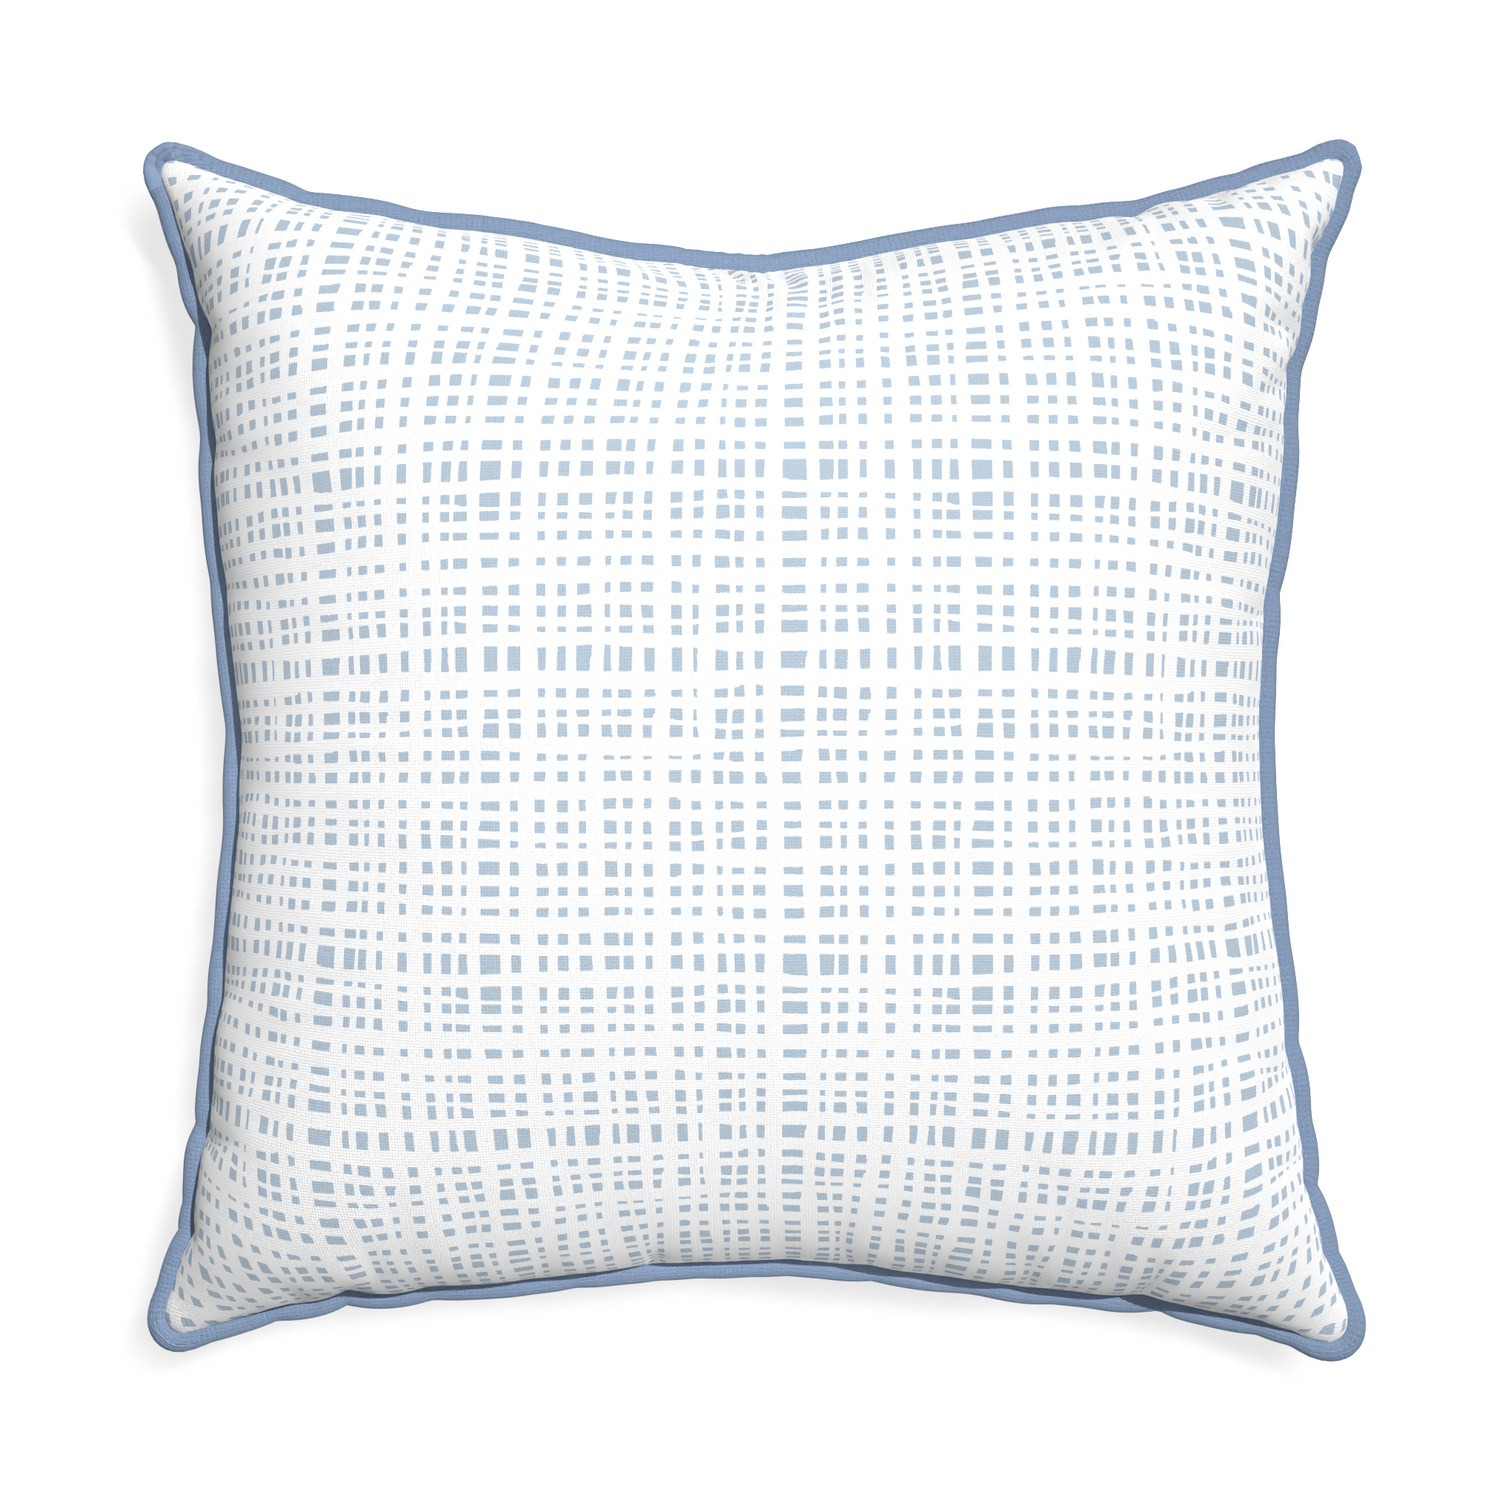 Euro-sham ginger sky custom pillow with sky piping on white background